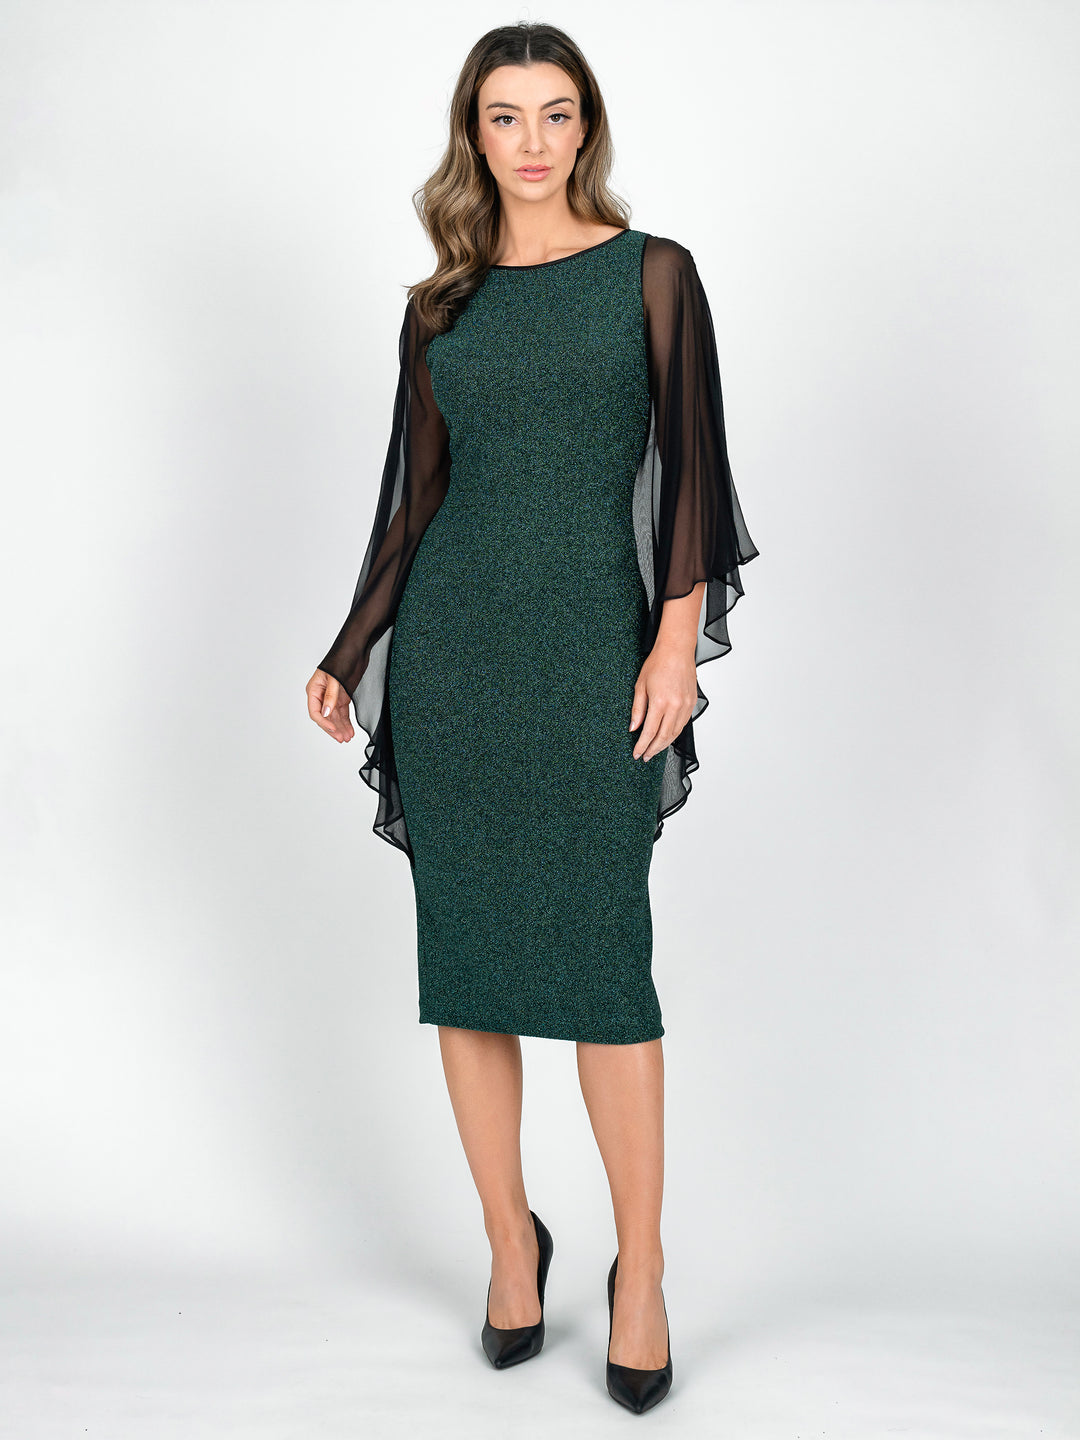 Green sparkly knee length cocktail dress with flowy silk sleeves